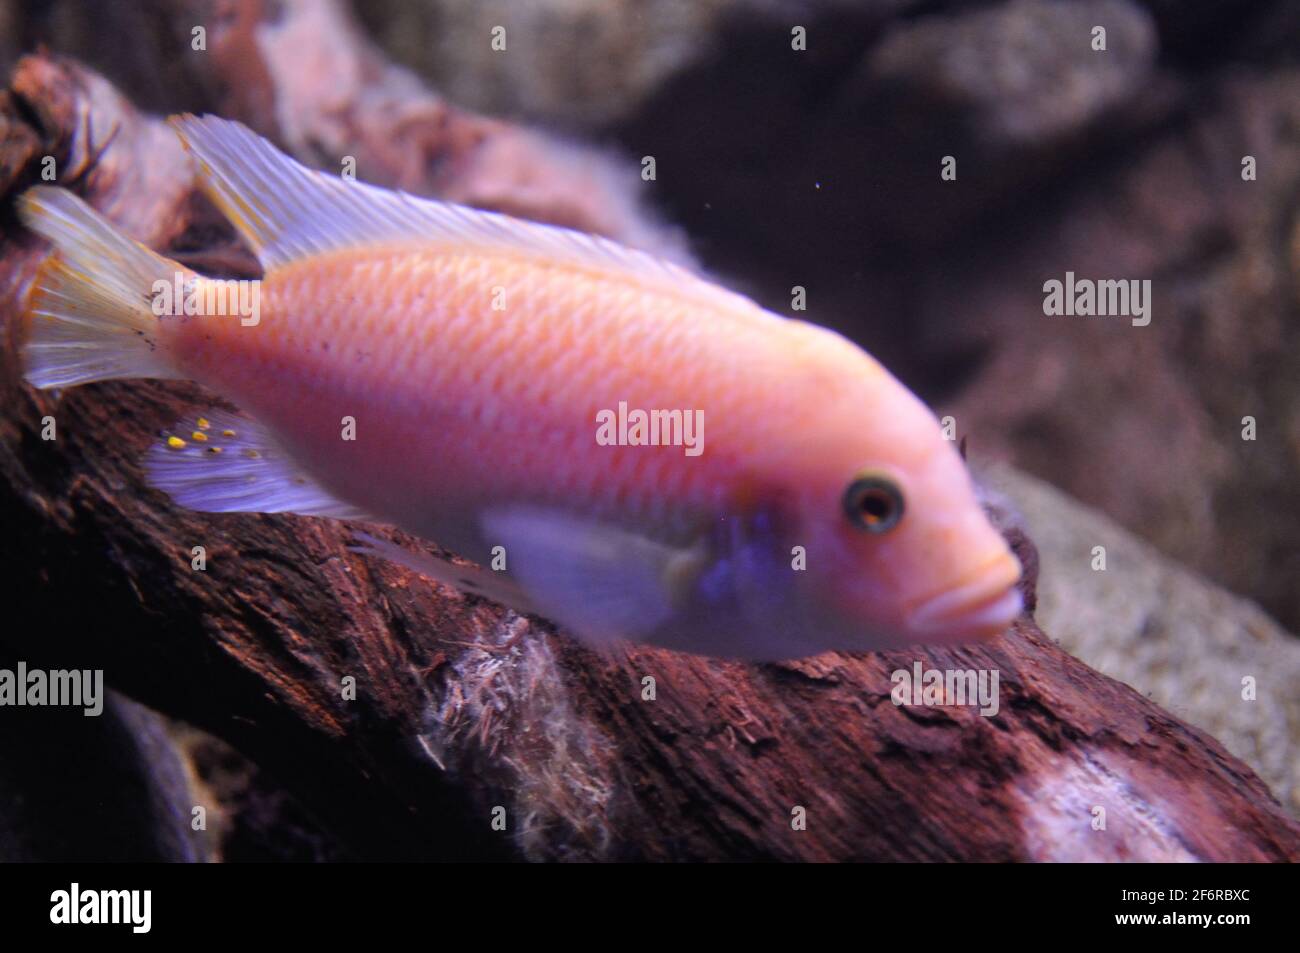 pink fish with black eye and transparent fins Stock Photo - Alamy